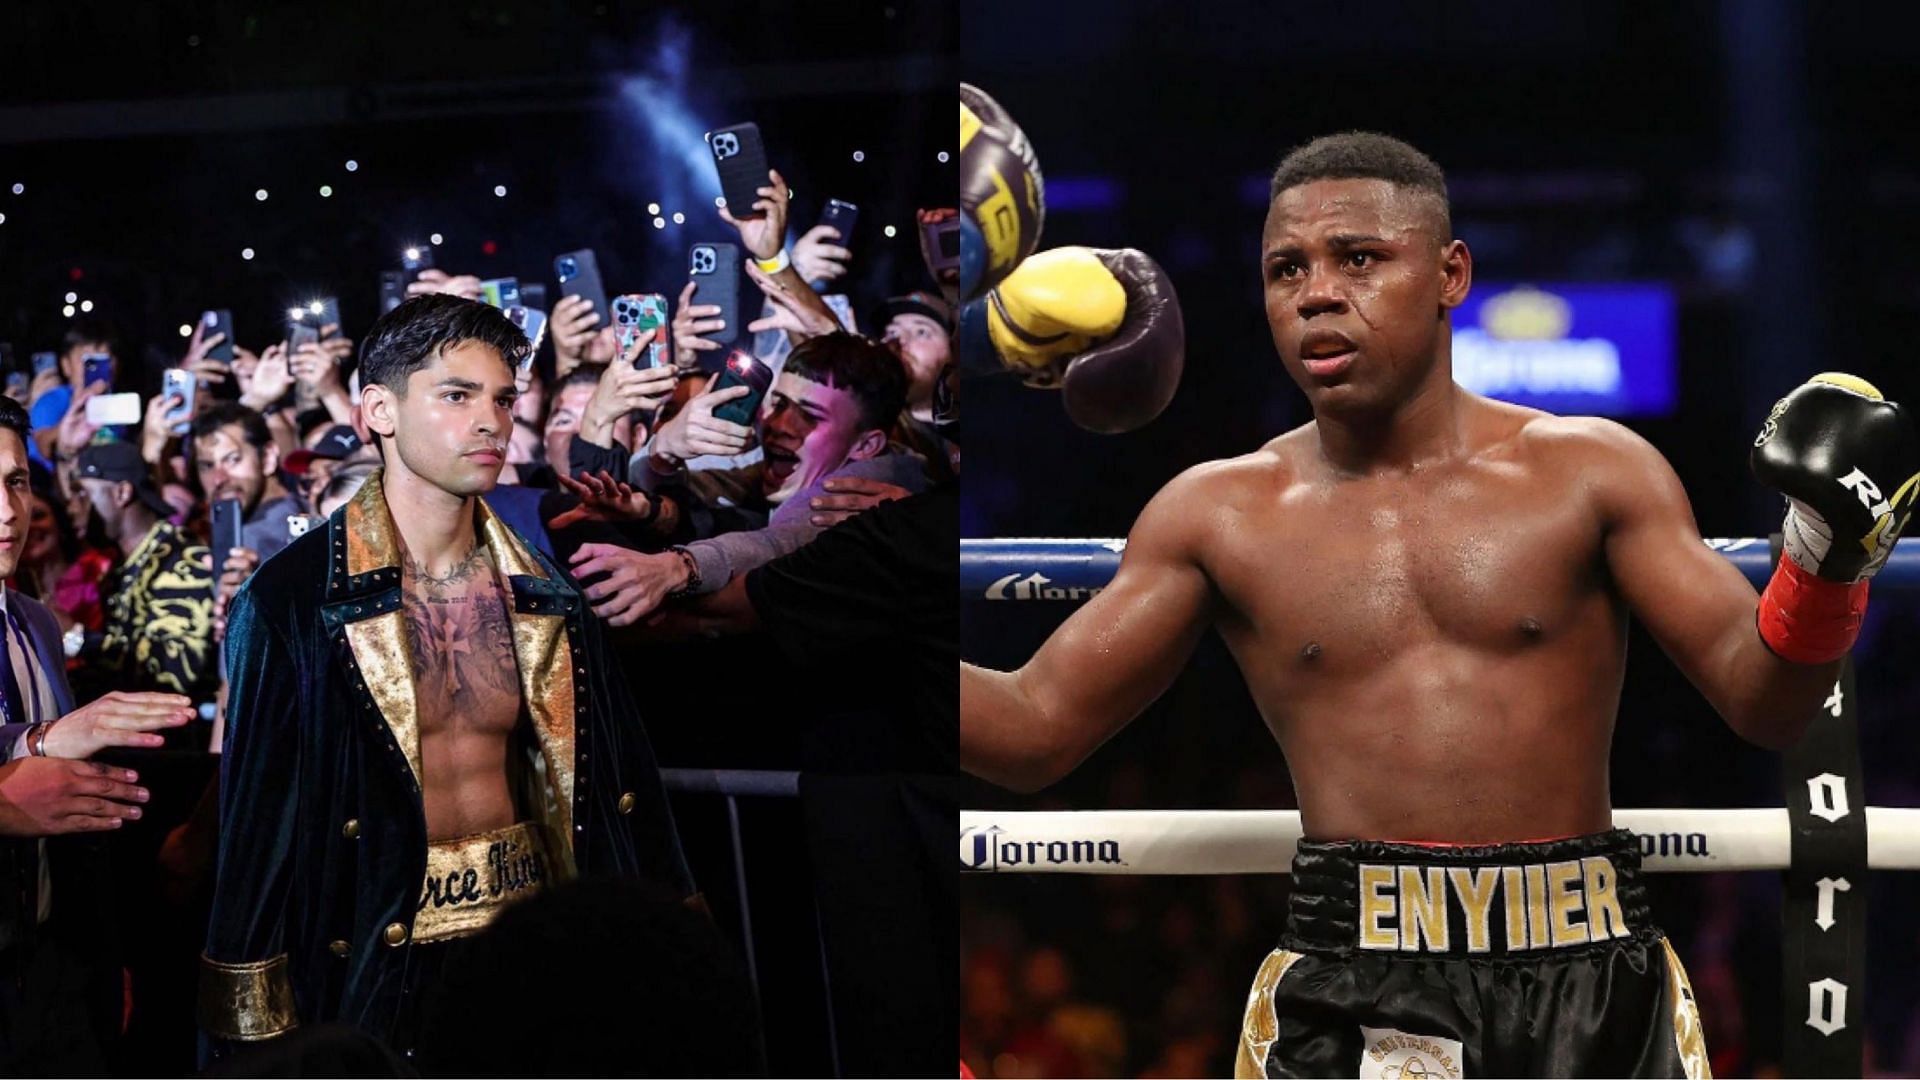 Ryan Garcia (left), Javier Fortuna (right) [Images courtesy of Instagram (@kingryan) and Getty]